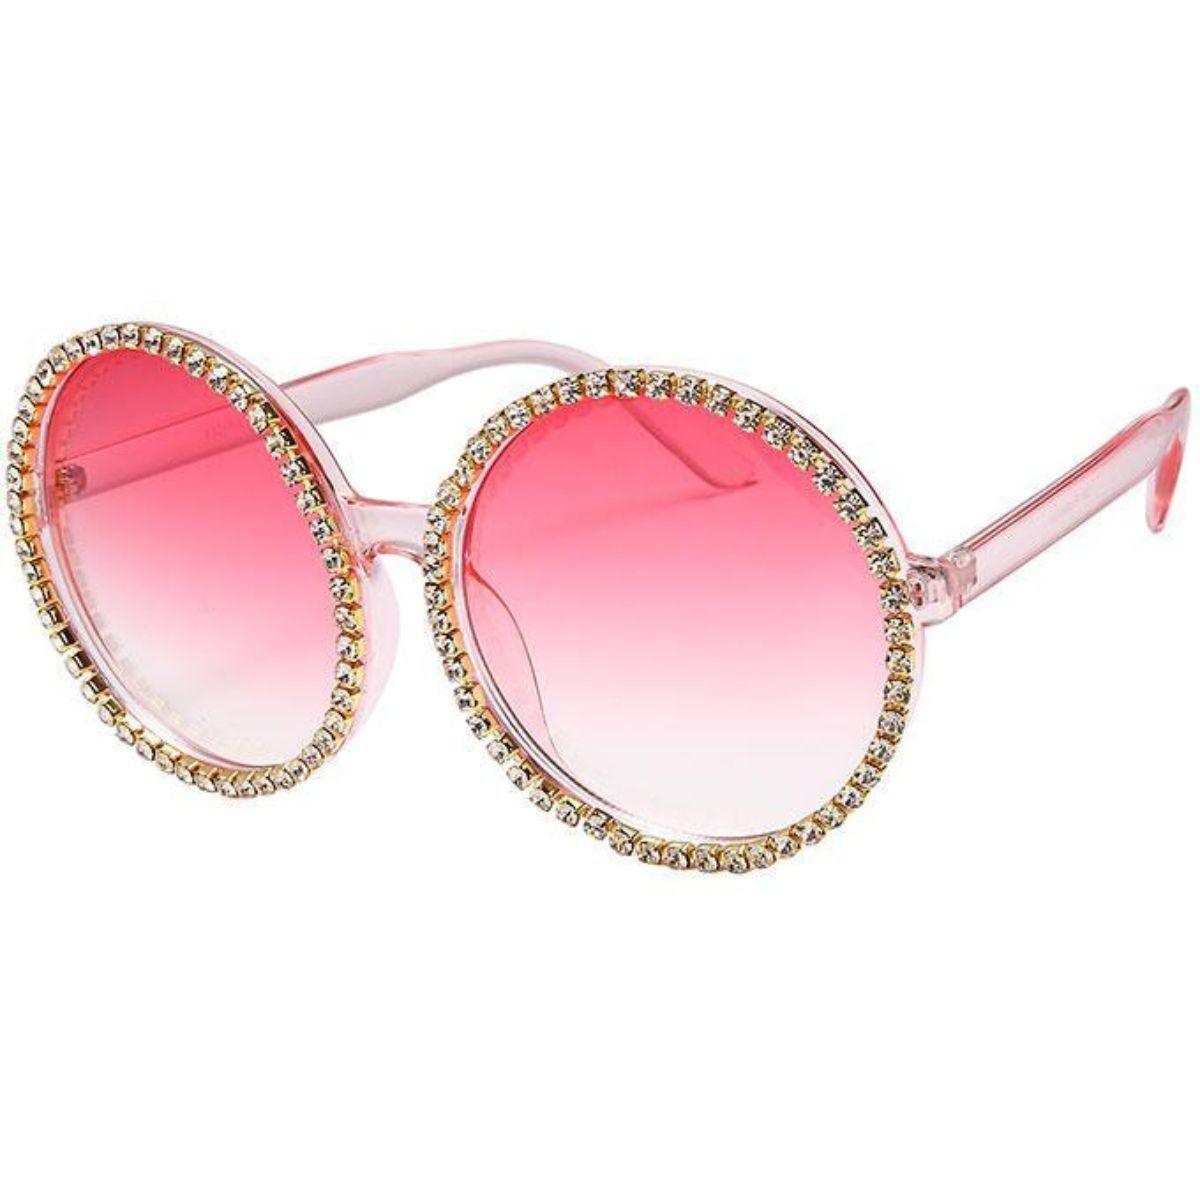 Pink Round Sunglasses for Women - Mega Stylish Must-Haves